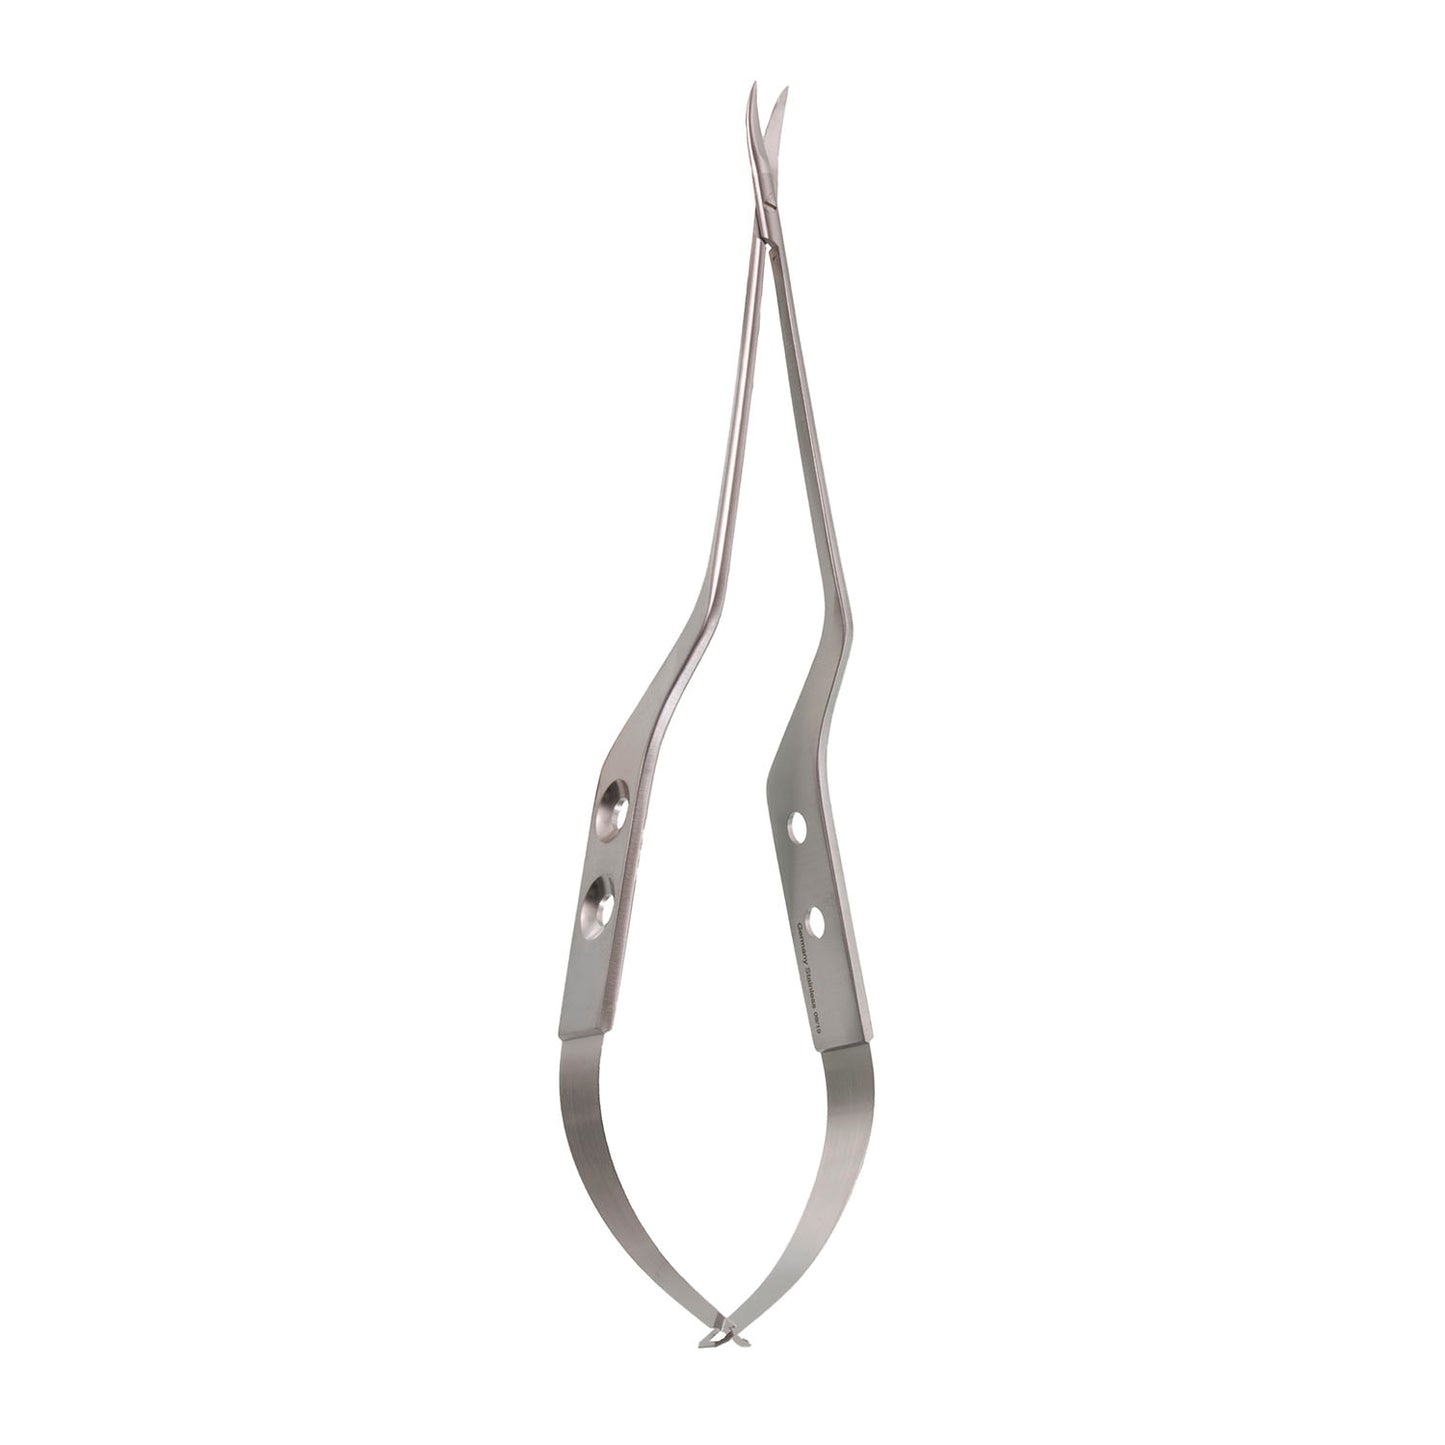 Yasargil Micro Scissors blades curved up